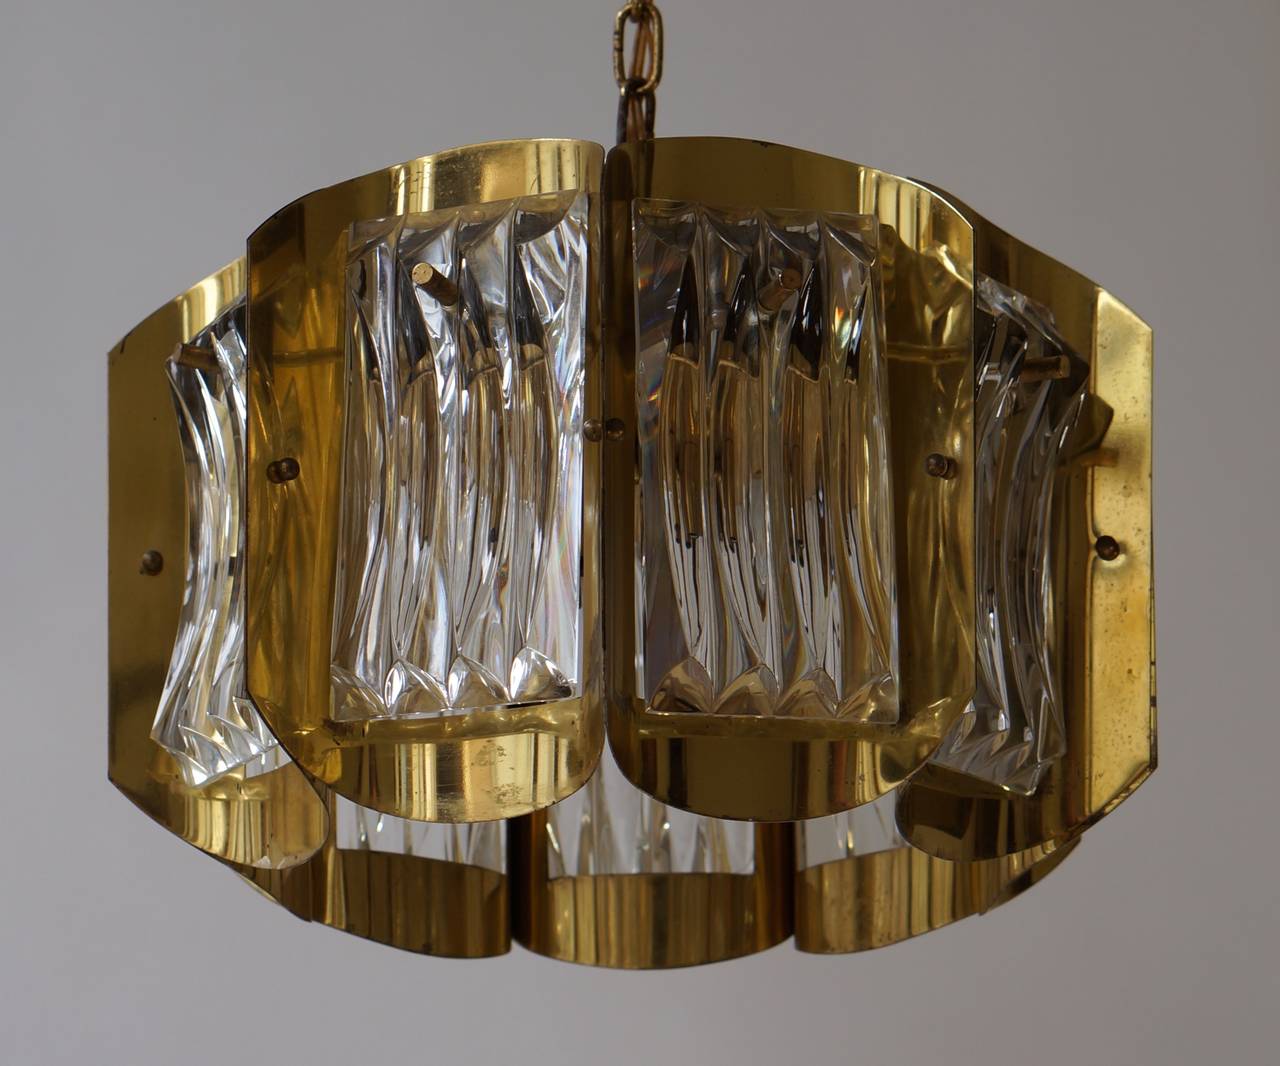 A Murano glass chandelier. 
Brass hardware. Size given if for fixture only (chain and canopy extra 100 cm). Chandelier has four light sockets.